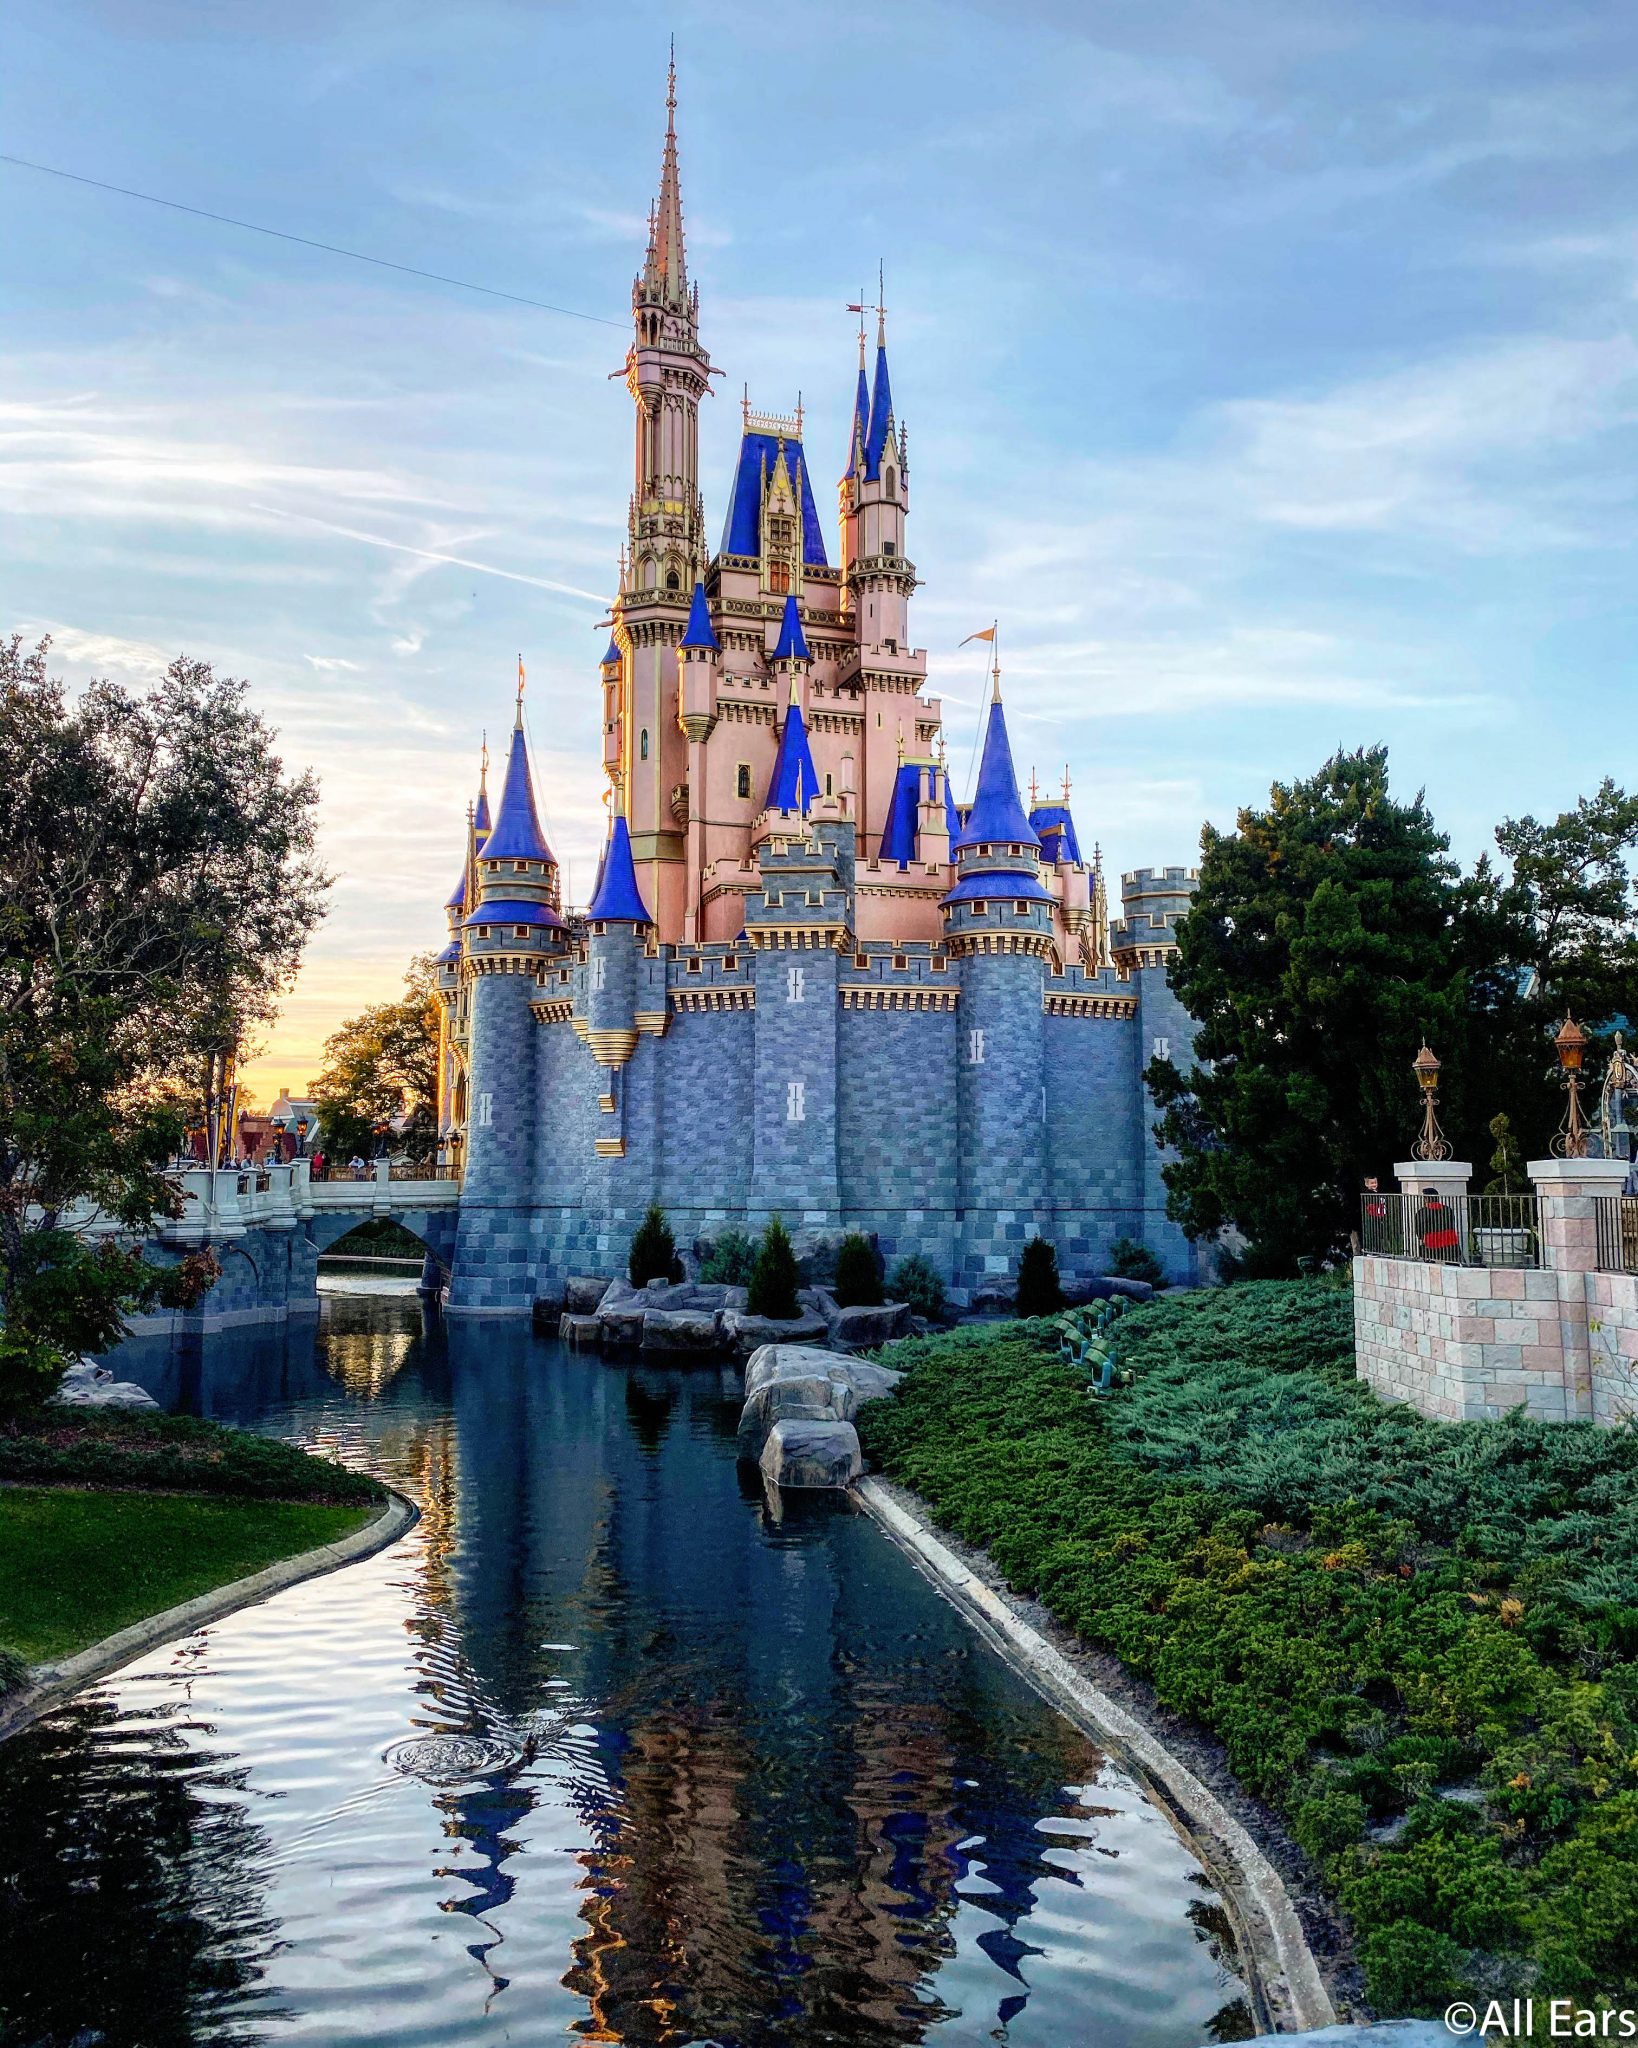 Here’s How to Take the PERFECT Cinderella Castle Pictures in Disney